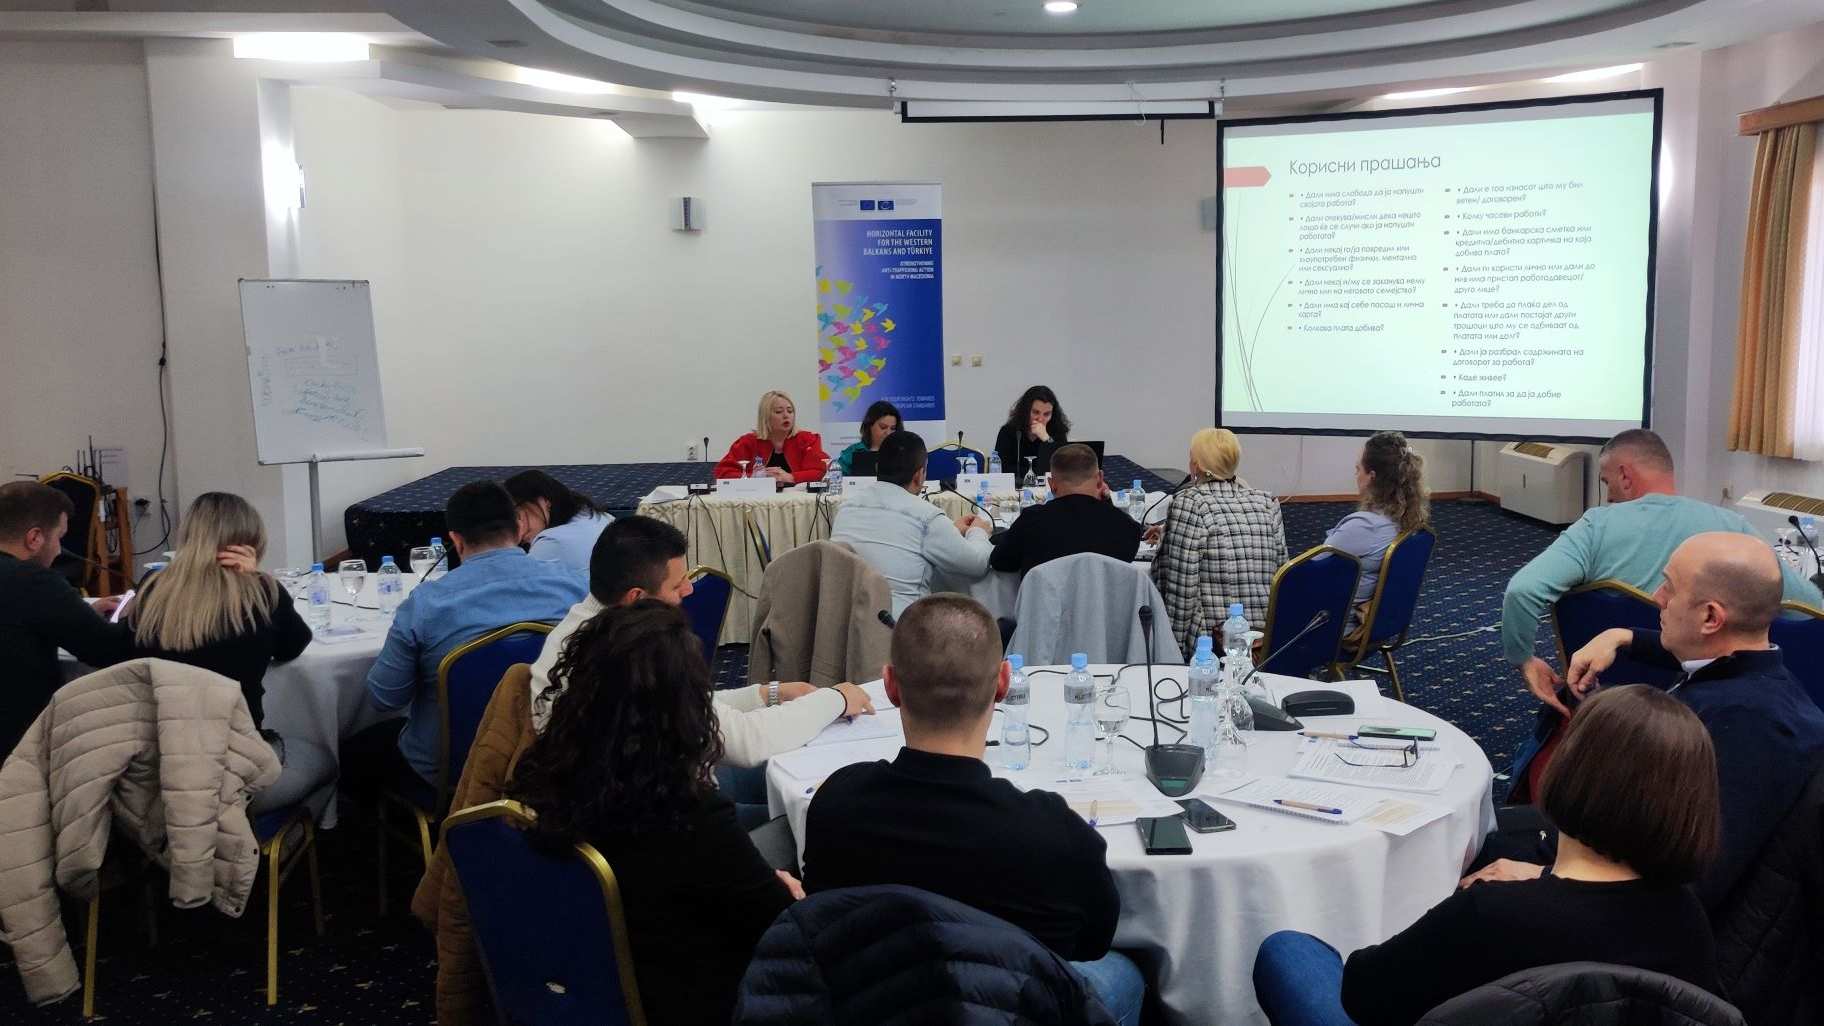 Anti-trafficking actors in North Macedonia  increase their capacities to prevent and combat human trafficking  for labour exploitation